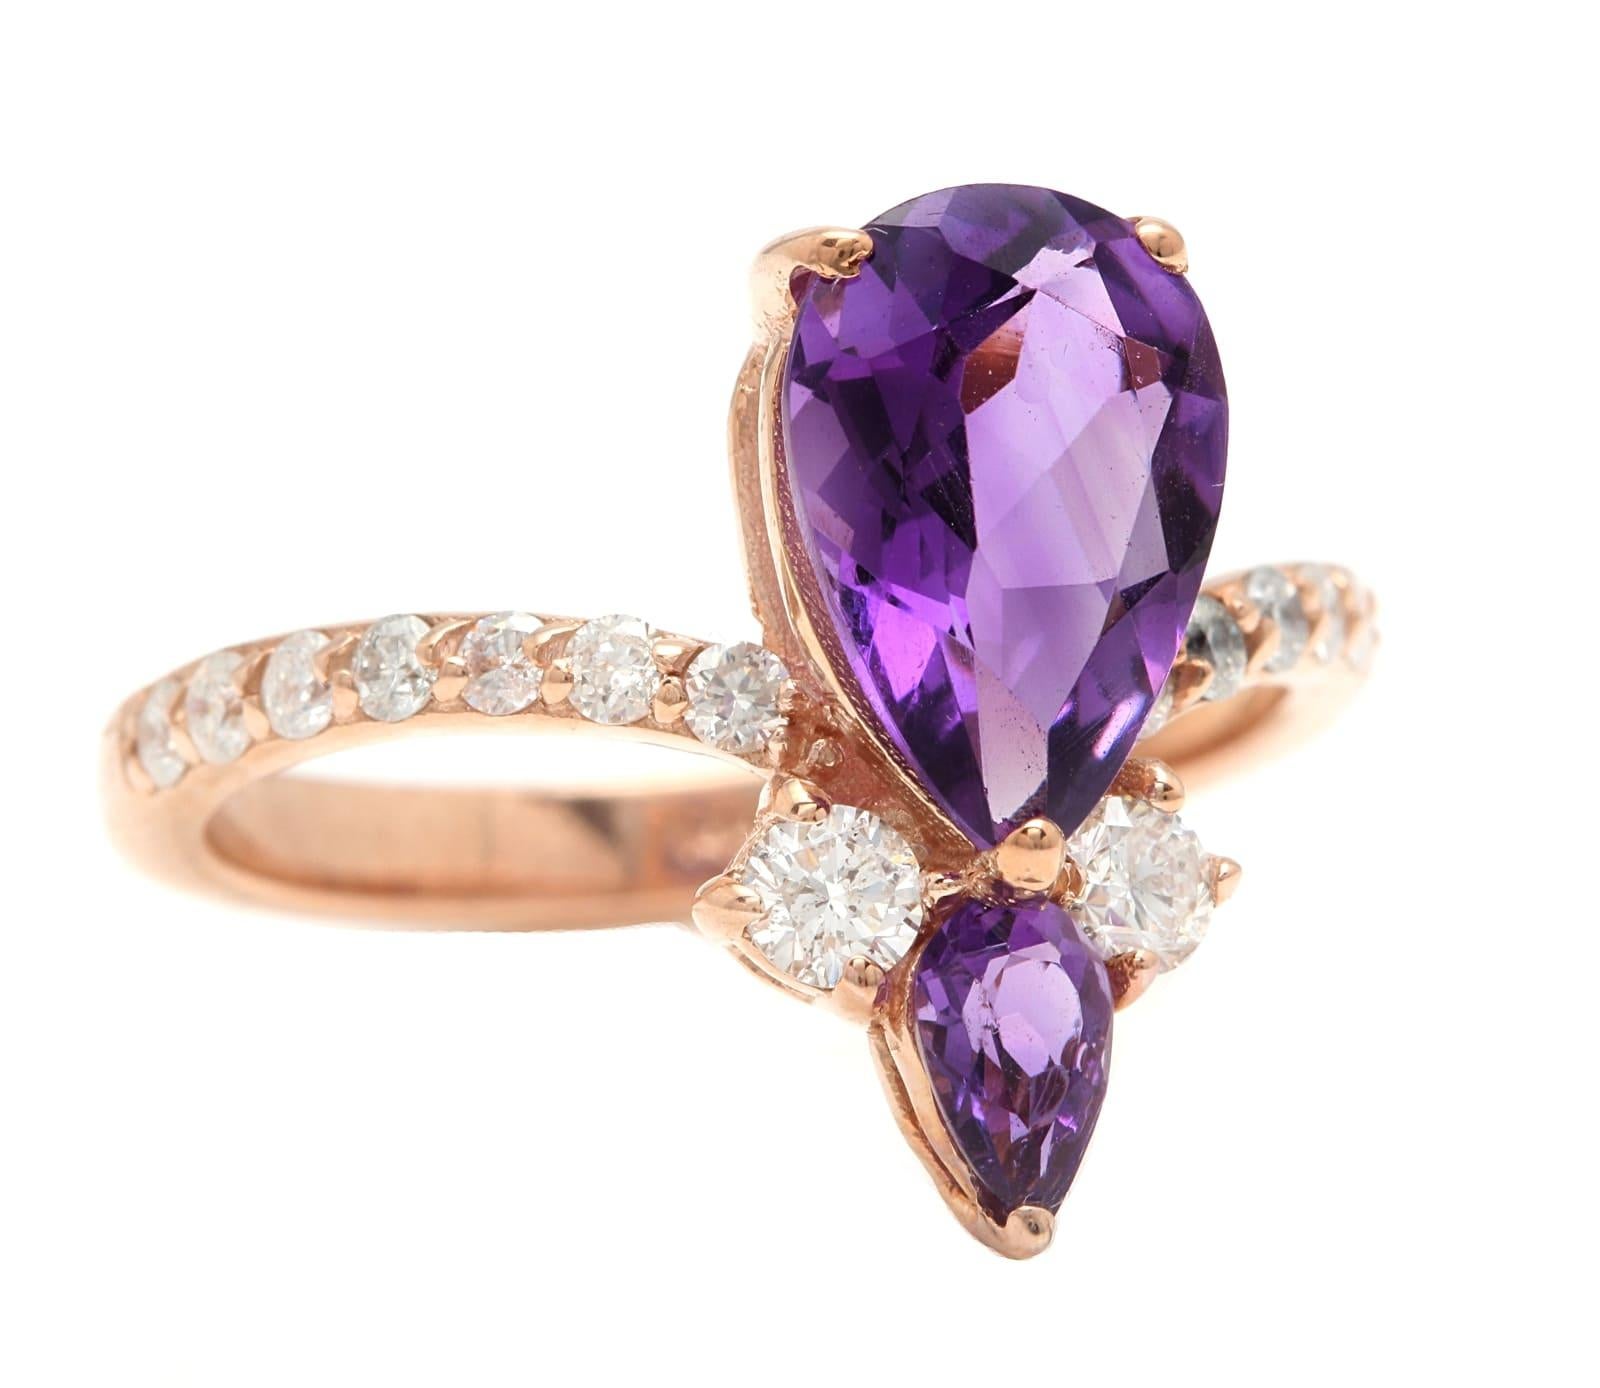 2.00 Carats Natural  Impressive Amethyst and Diamond 14K Rose Gold Ring

Suggested Replacement Value $3,500.00

Total Natural Amethysts Weight: Approx. 1.70 Carats

Center Amethyst Measures: Approx. 10 x 7mm

Natural Round Diamonds Weight: Approx.